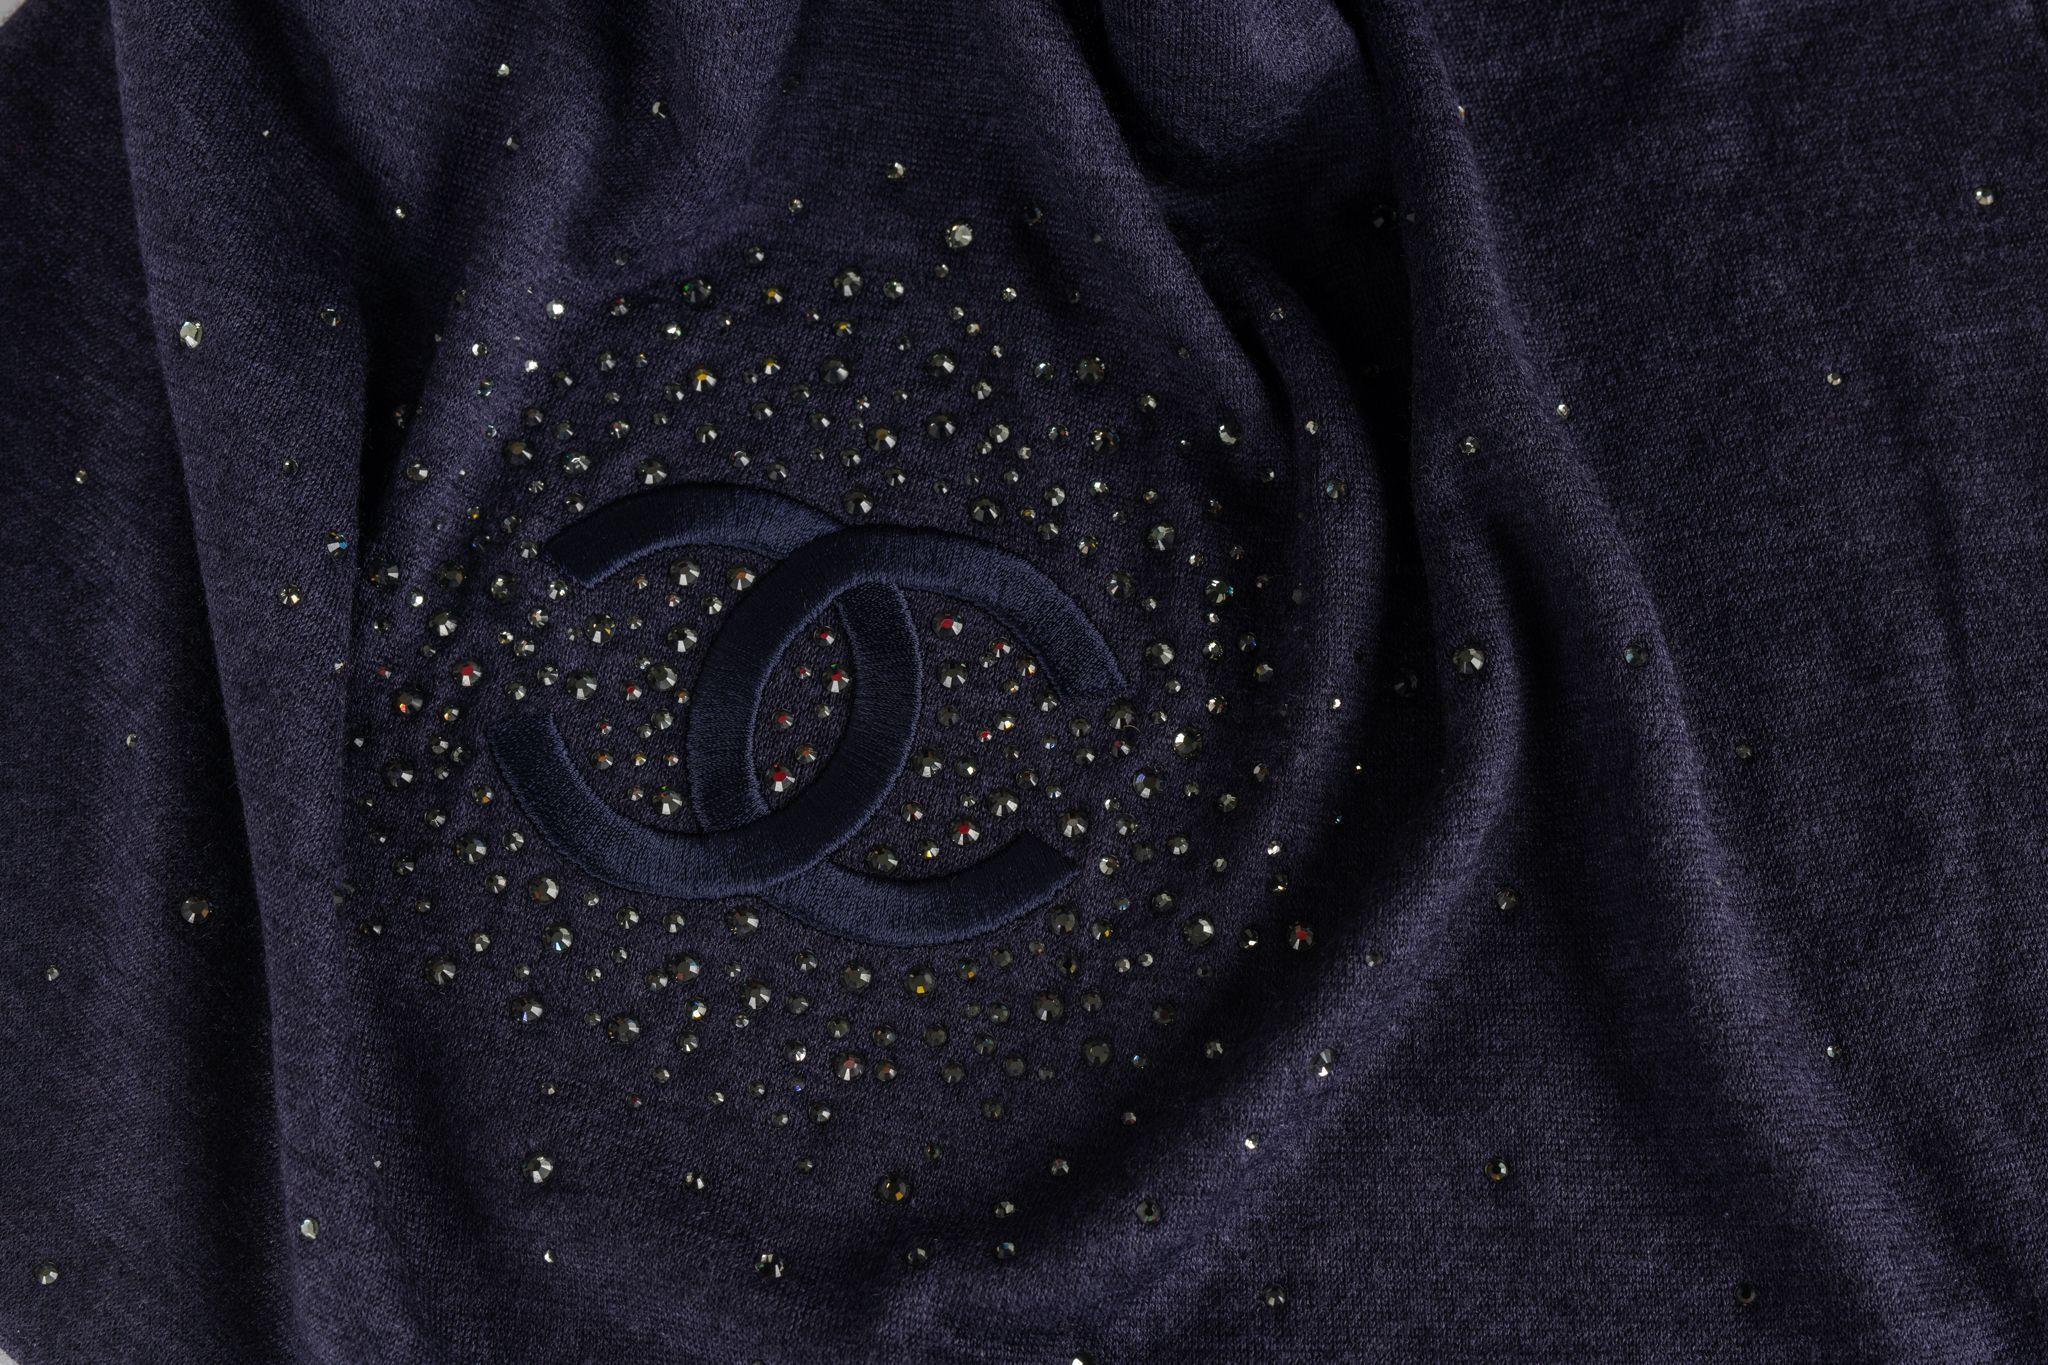 Chanel Cashmere stole in navy with a CC logo in black in the center surrounded by glitter stones. The item is in new condition.